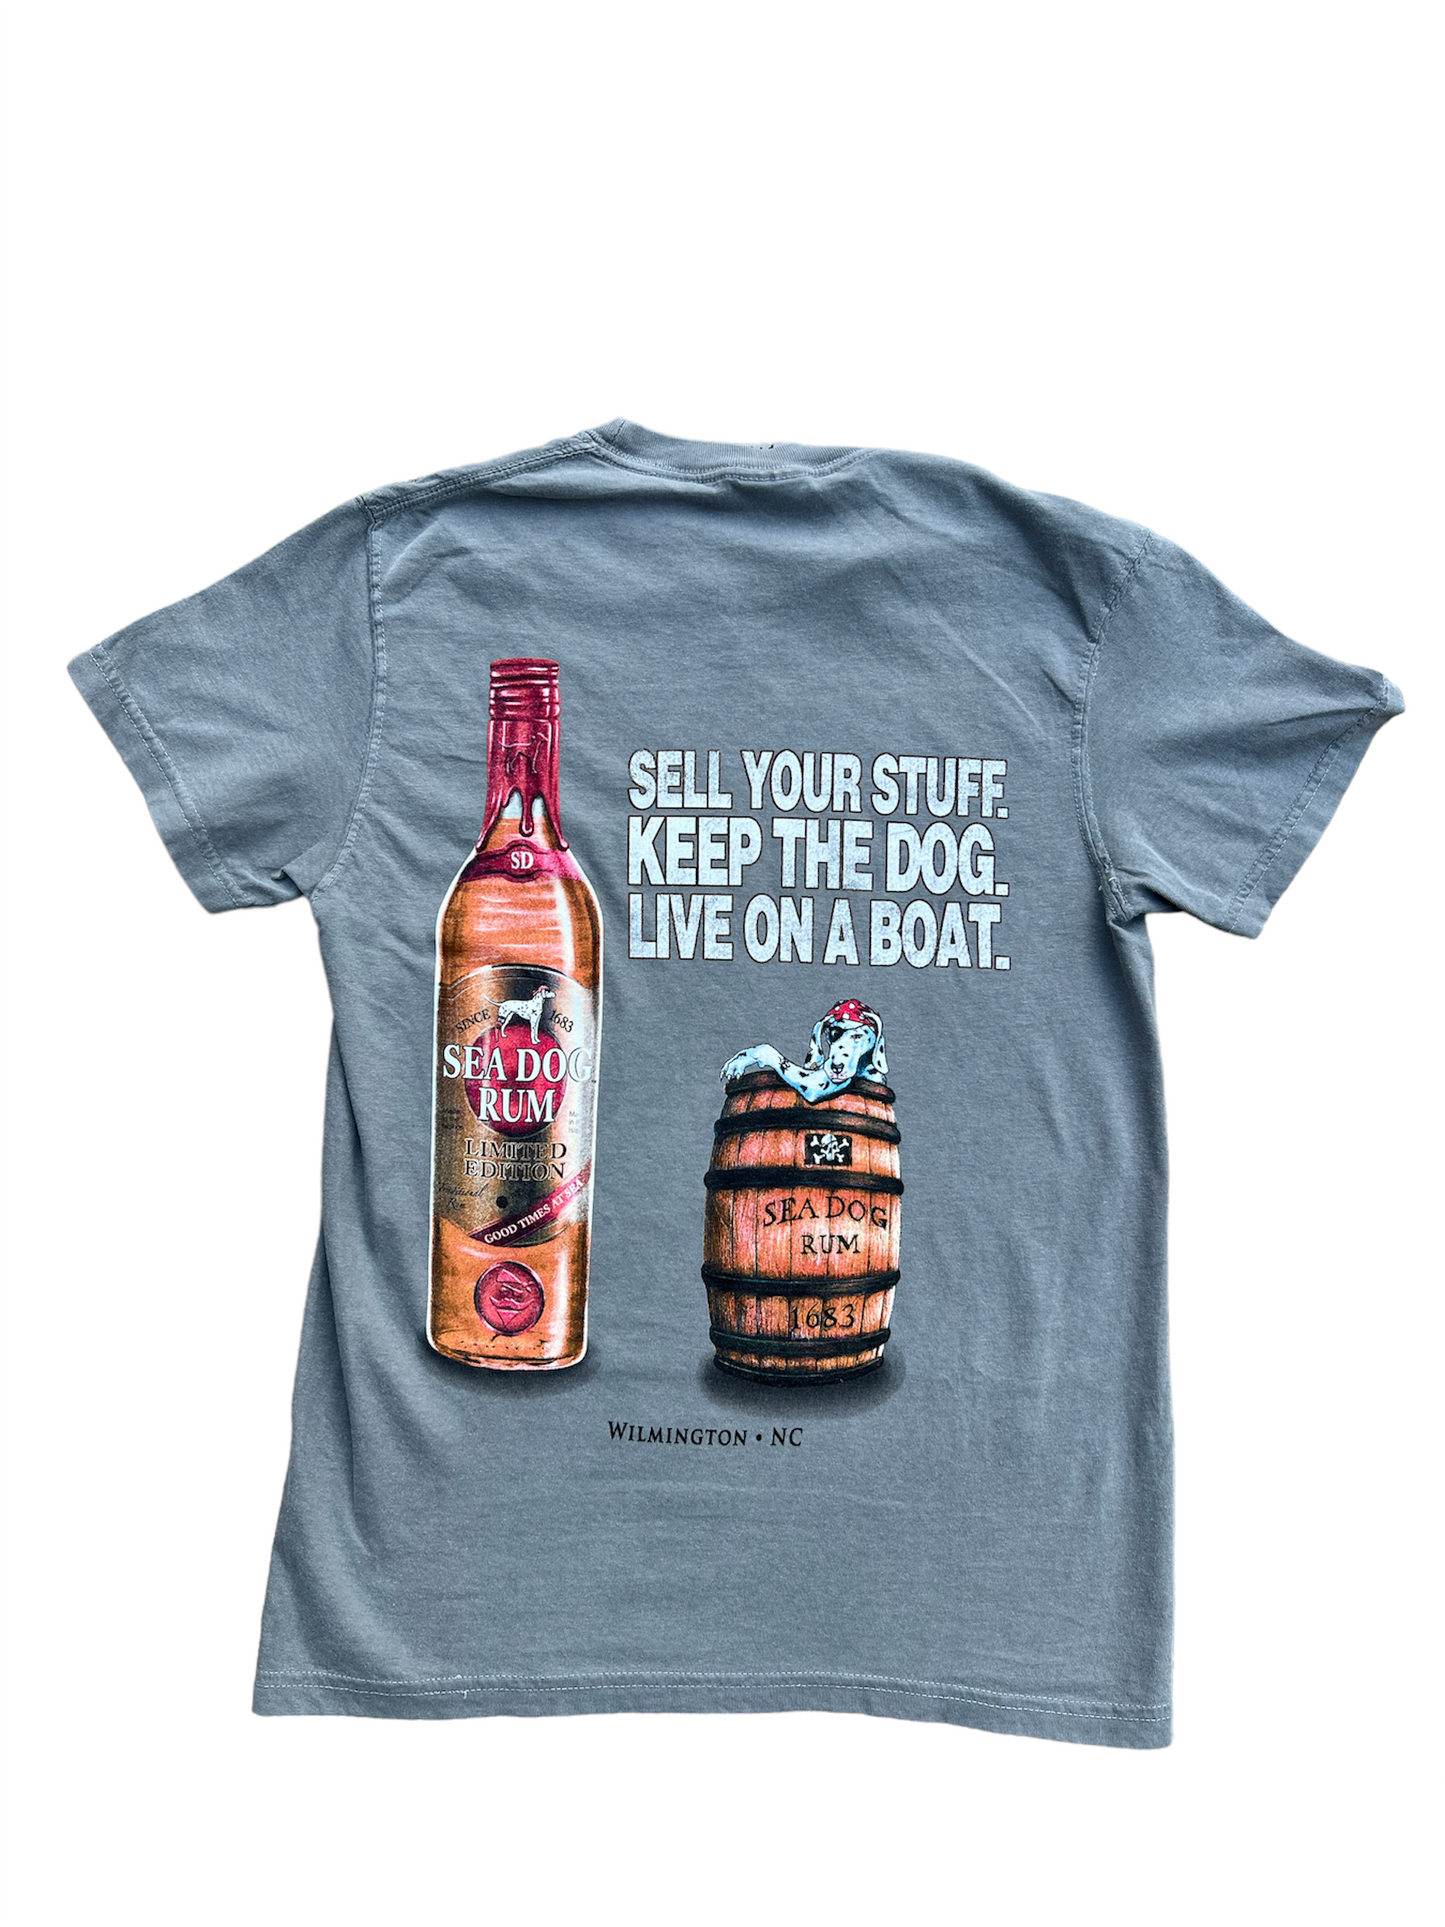 Sell Your Stuff Live on Boat - Sea Dog T Shirt - Grey